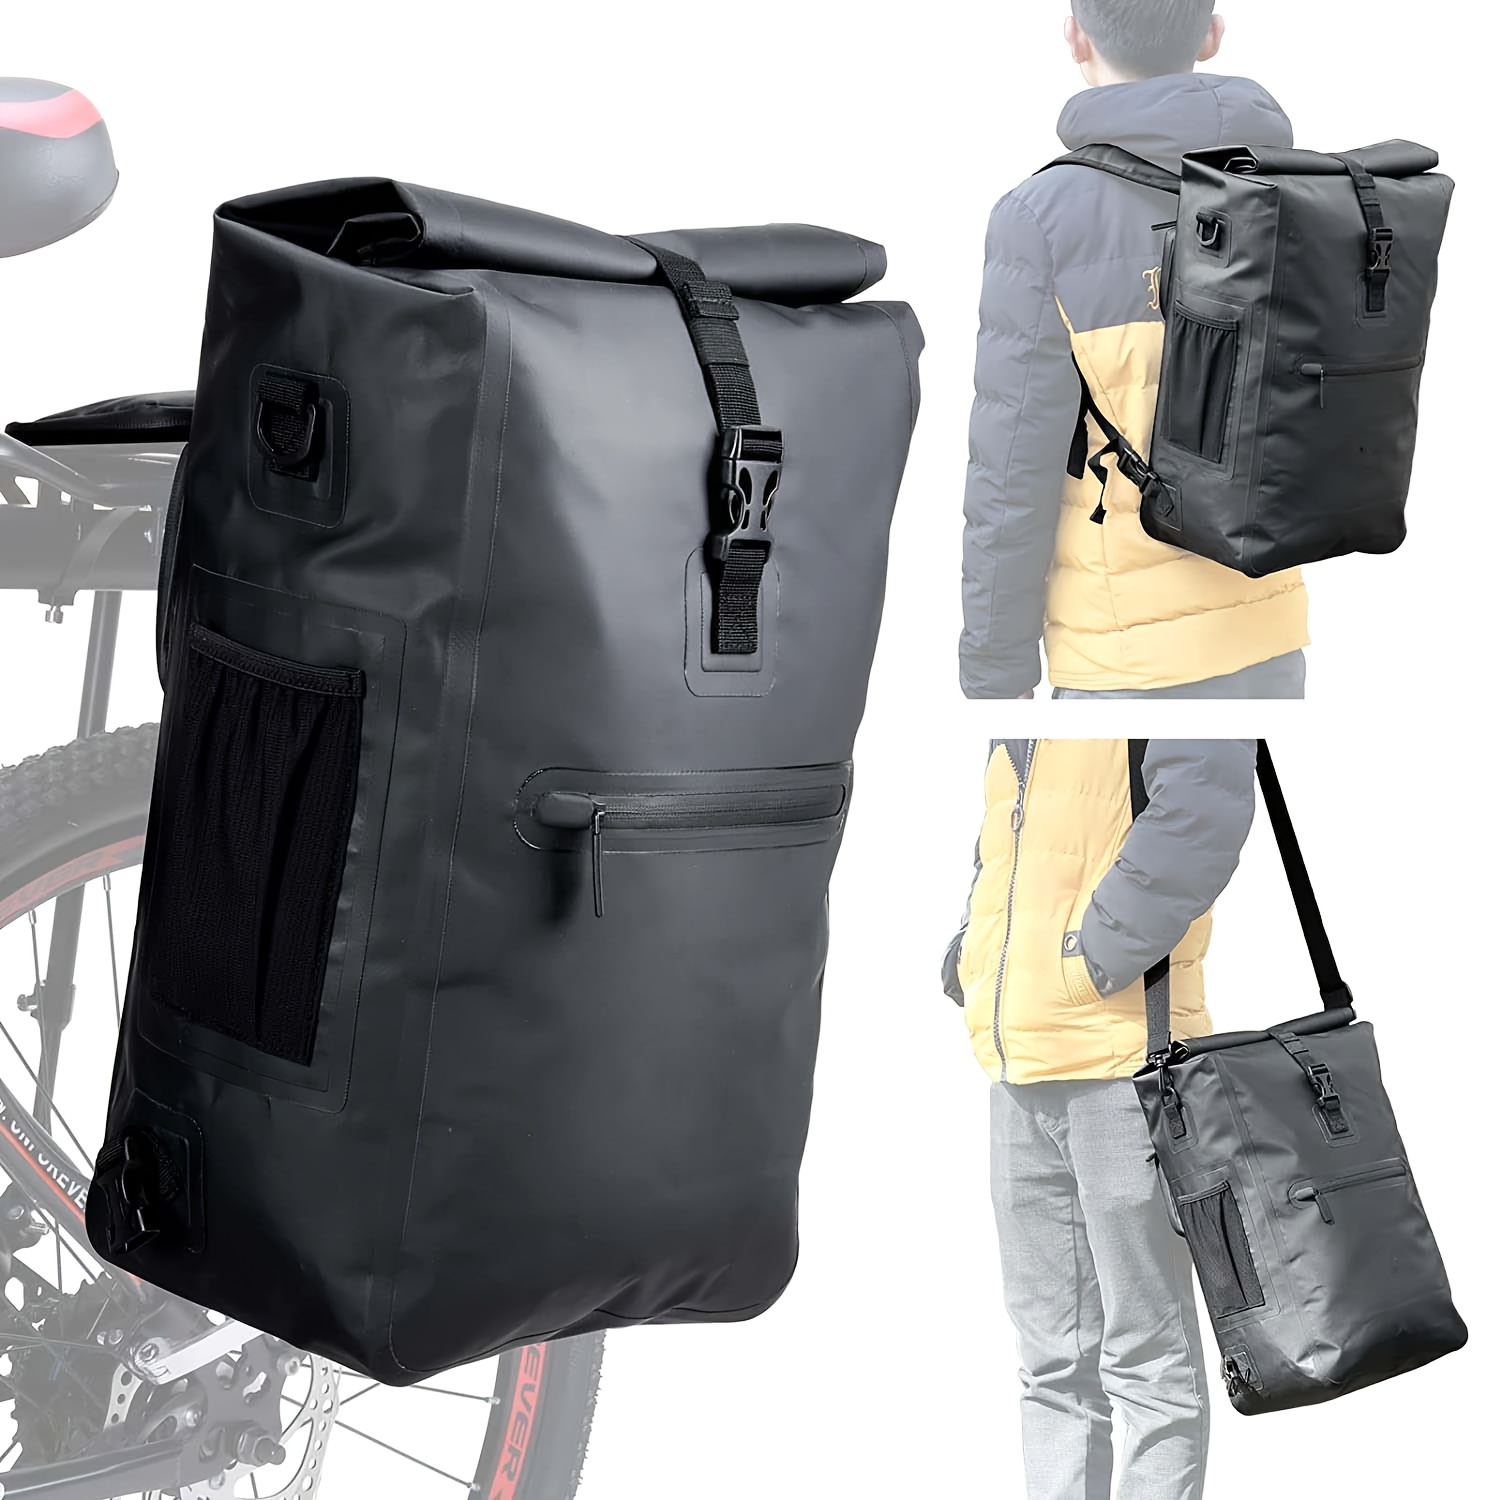 

Longhiker 25l Waterproof Bike Pannier Bag, 3 In 1 Adjustable Strap Rear Rack Cycling Bag, Professional Bicycle Seat Trunk Pack With Easy-clean Pvc Fabric For Songkran Festival